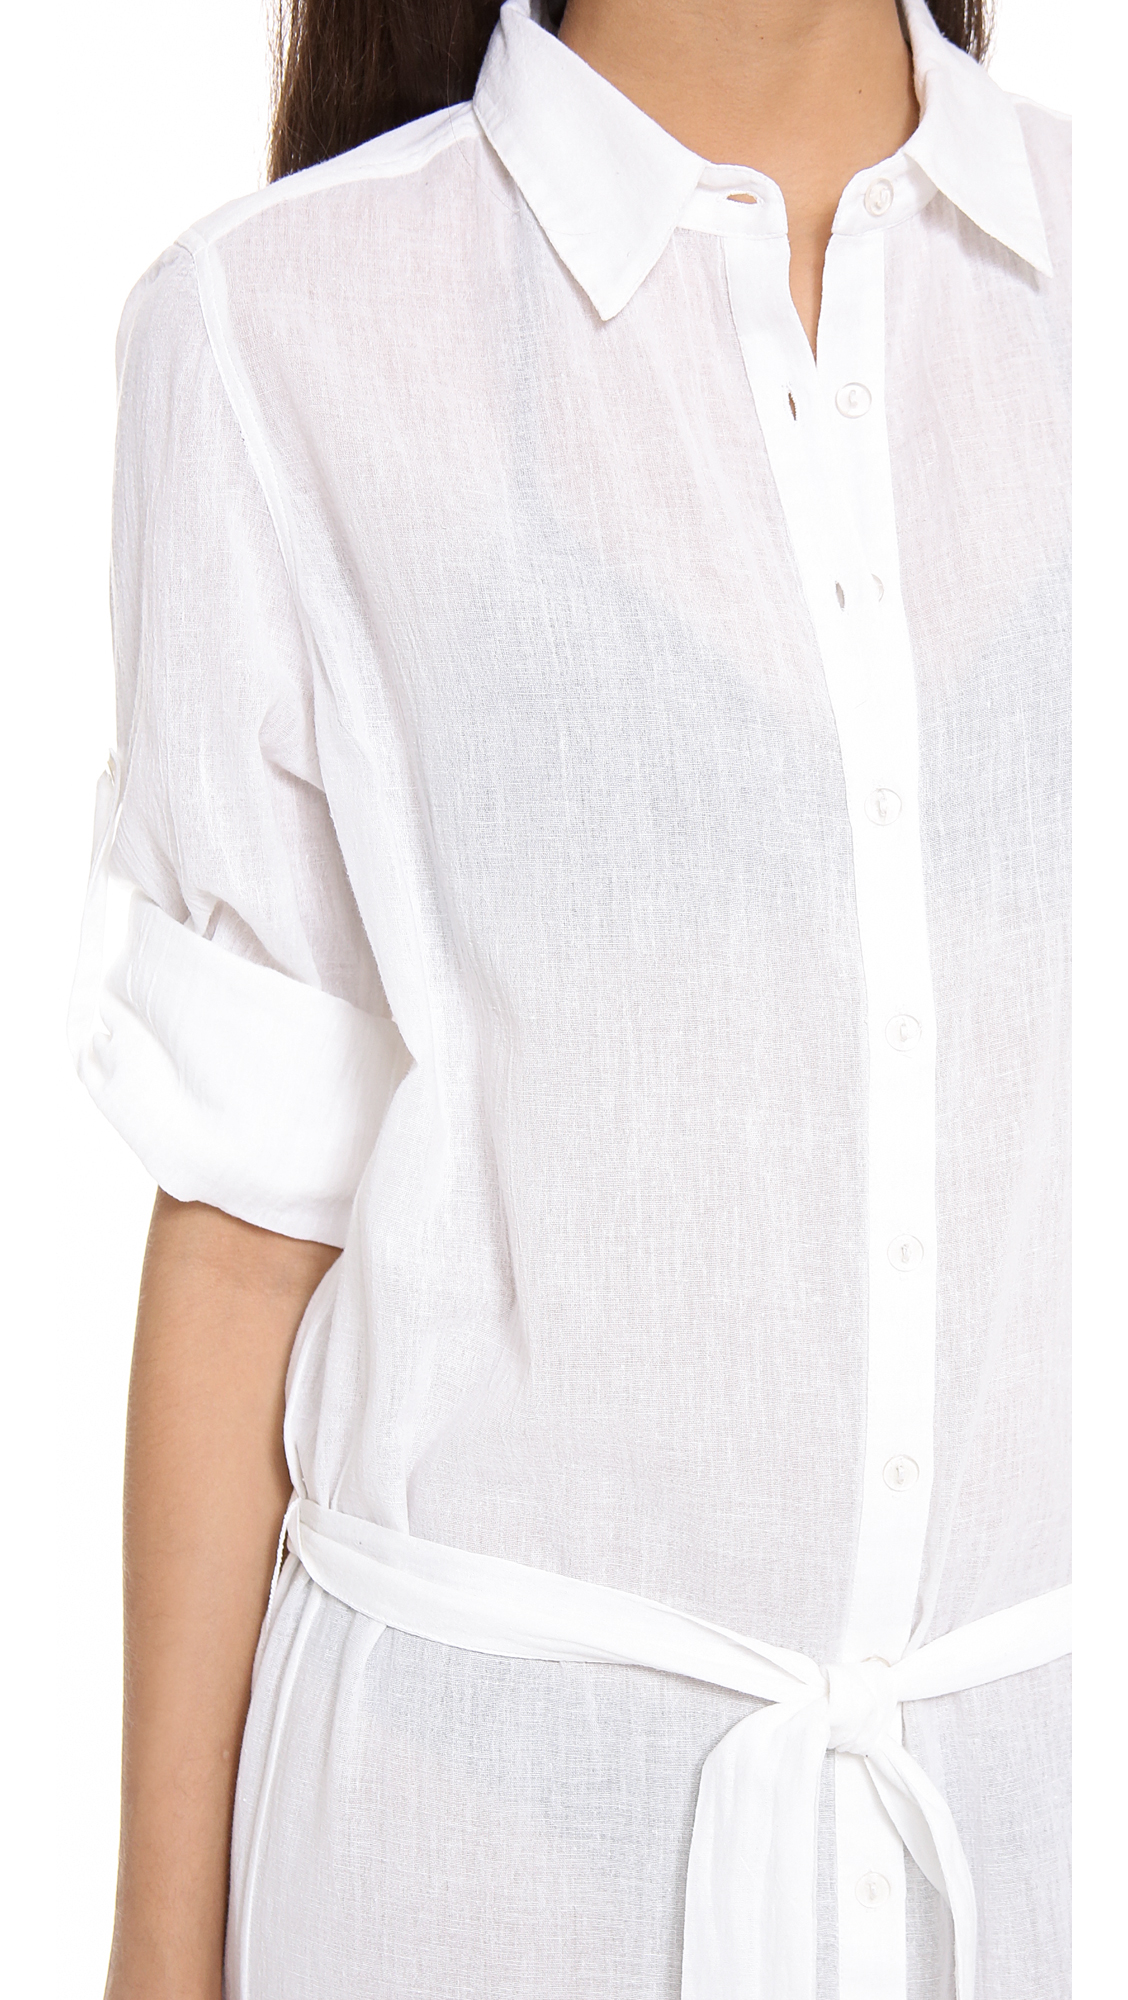 Lyst Thayer Shirt  Dress  Cover  Up  White Gauze in White